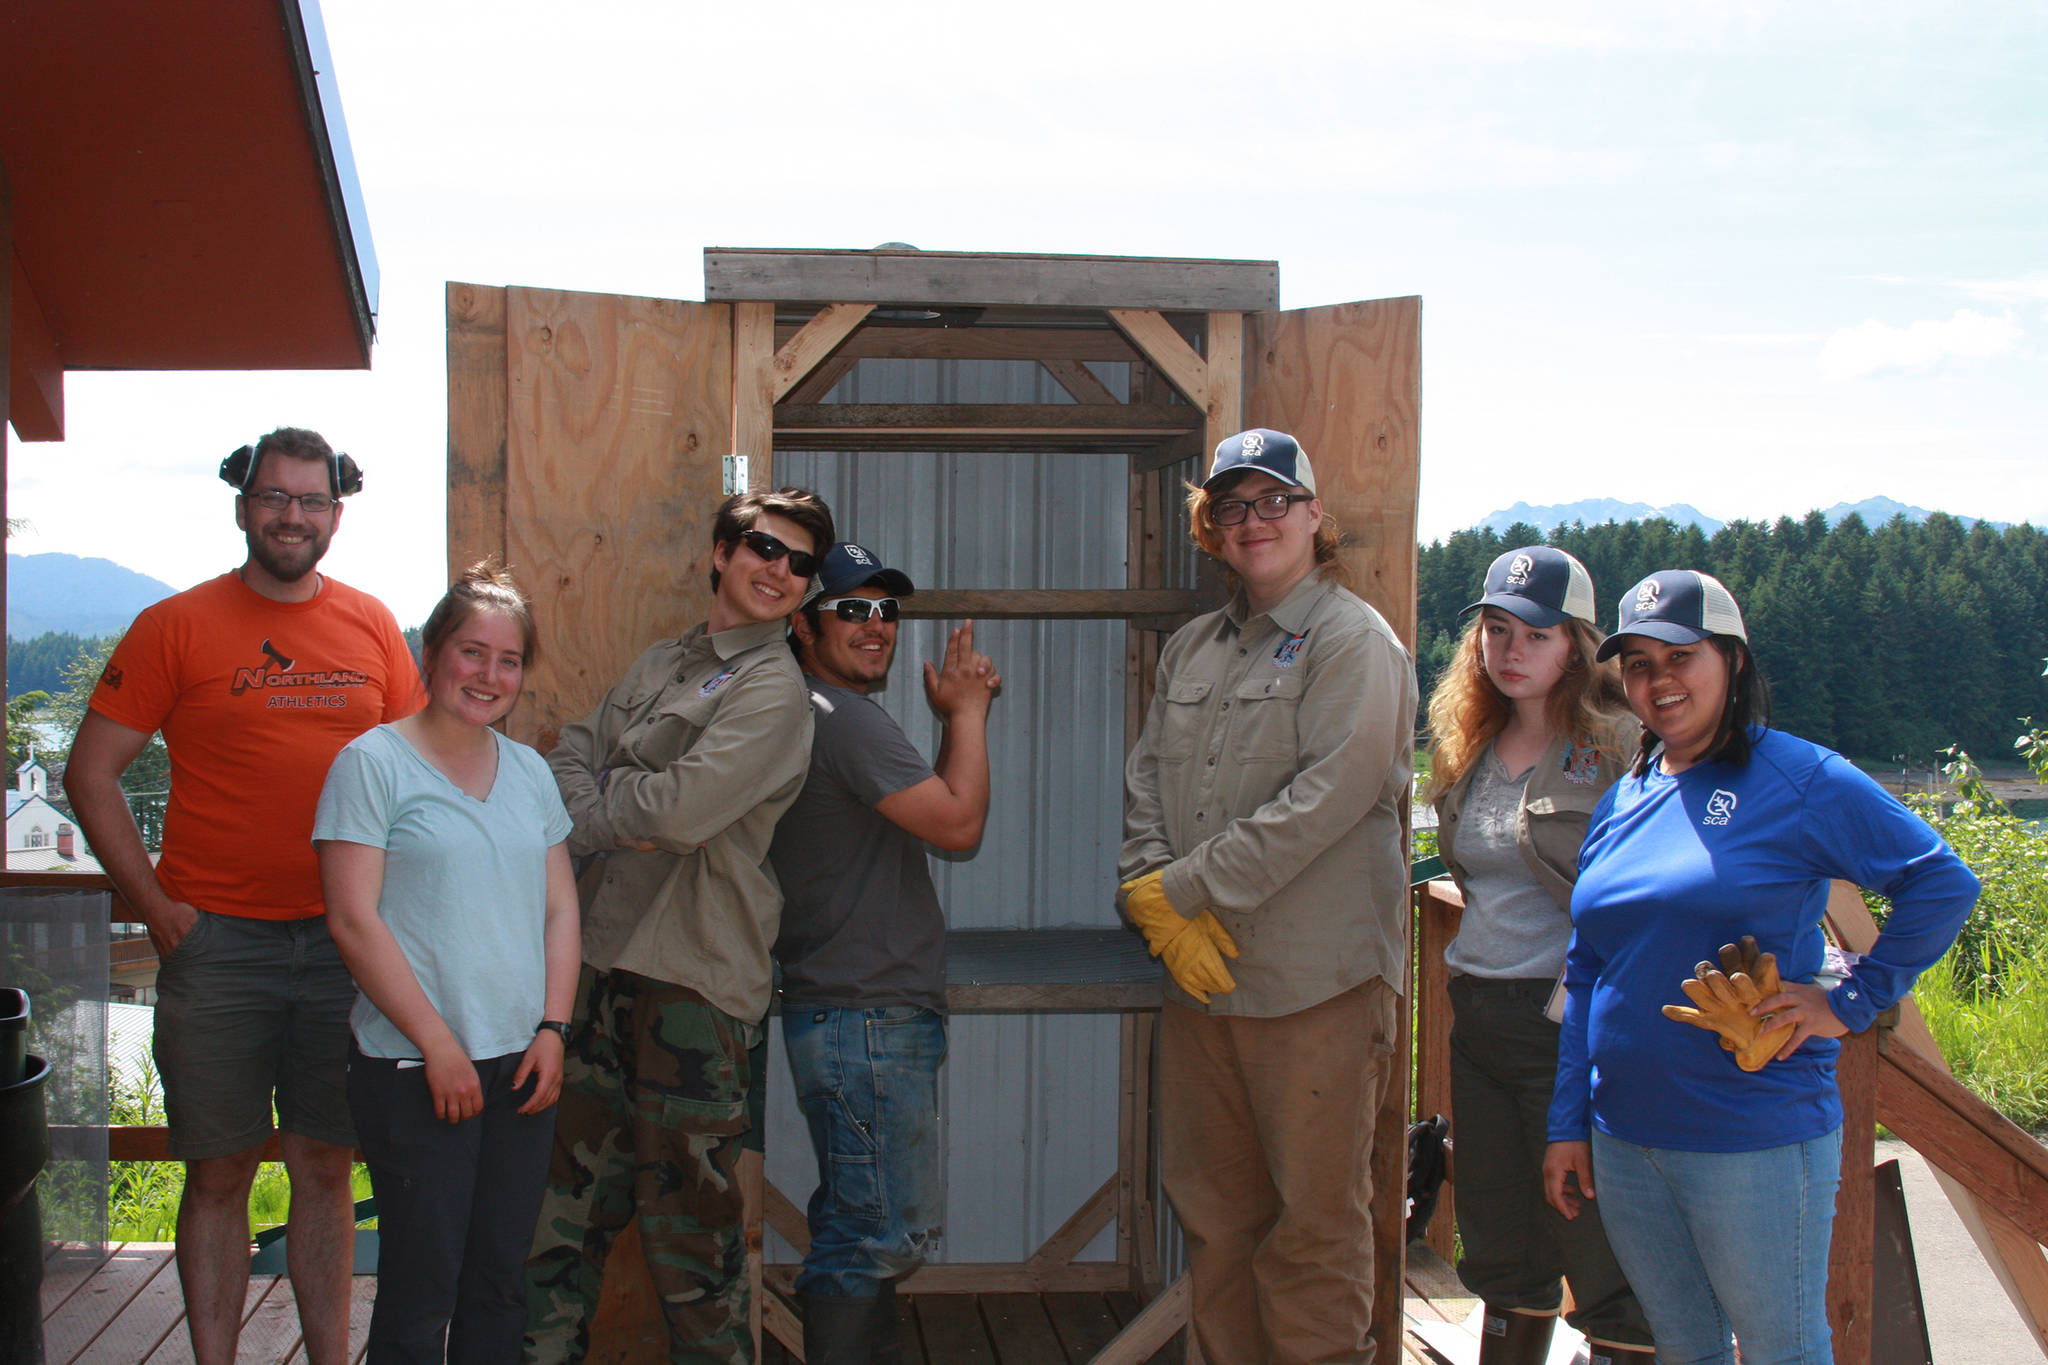 TRAYLS crew stands with the completed smokehouse for Culture Camp. From left : Ian Johnson, Eva Bingham, Dawson Hollingsworth, Sam Sheakley, Nicholaus Treutel-Jacobsen, Ashlyn Gray, Rebekah Sawers. (Courtesy Photo | Sean Williams)